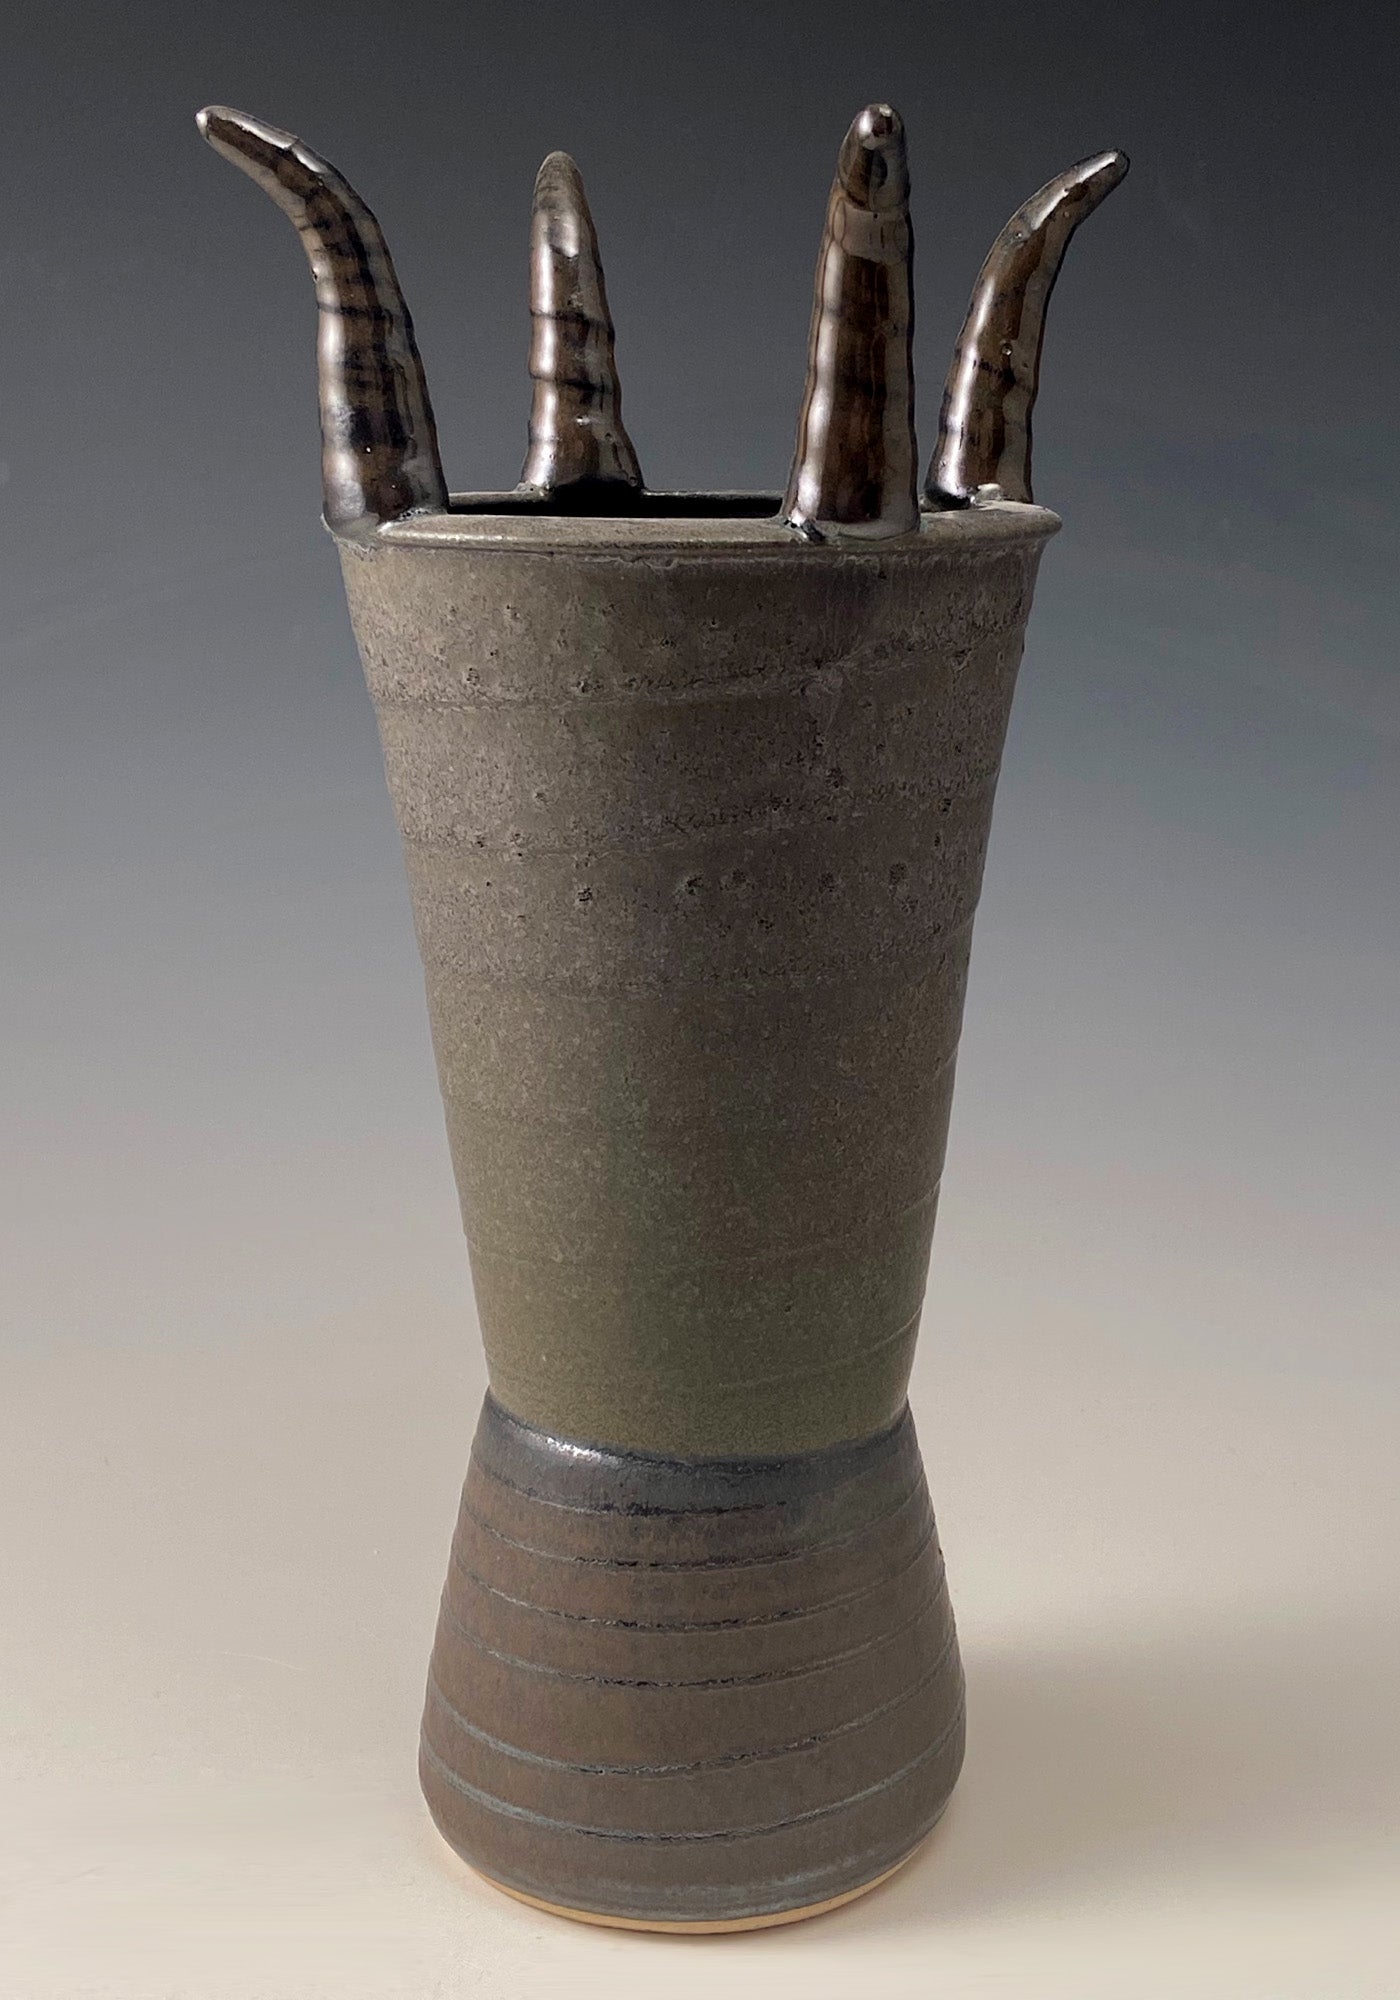 Vase with 4 Horns